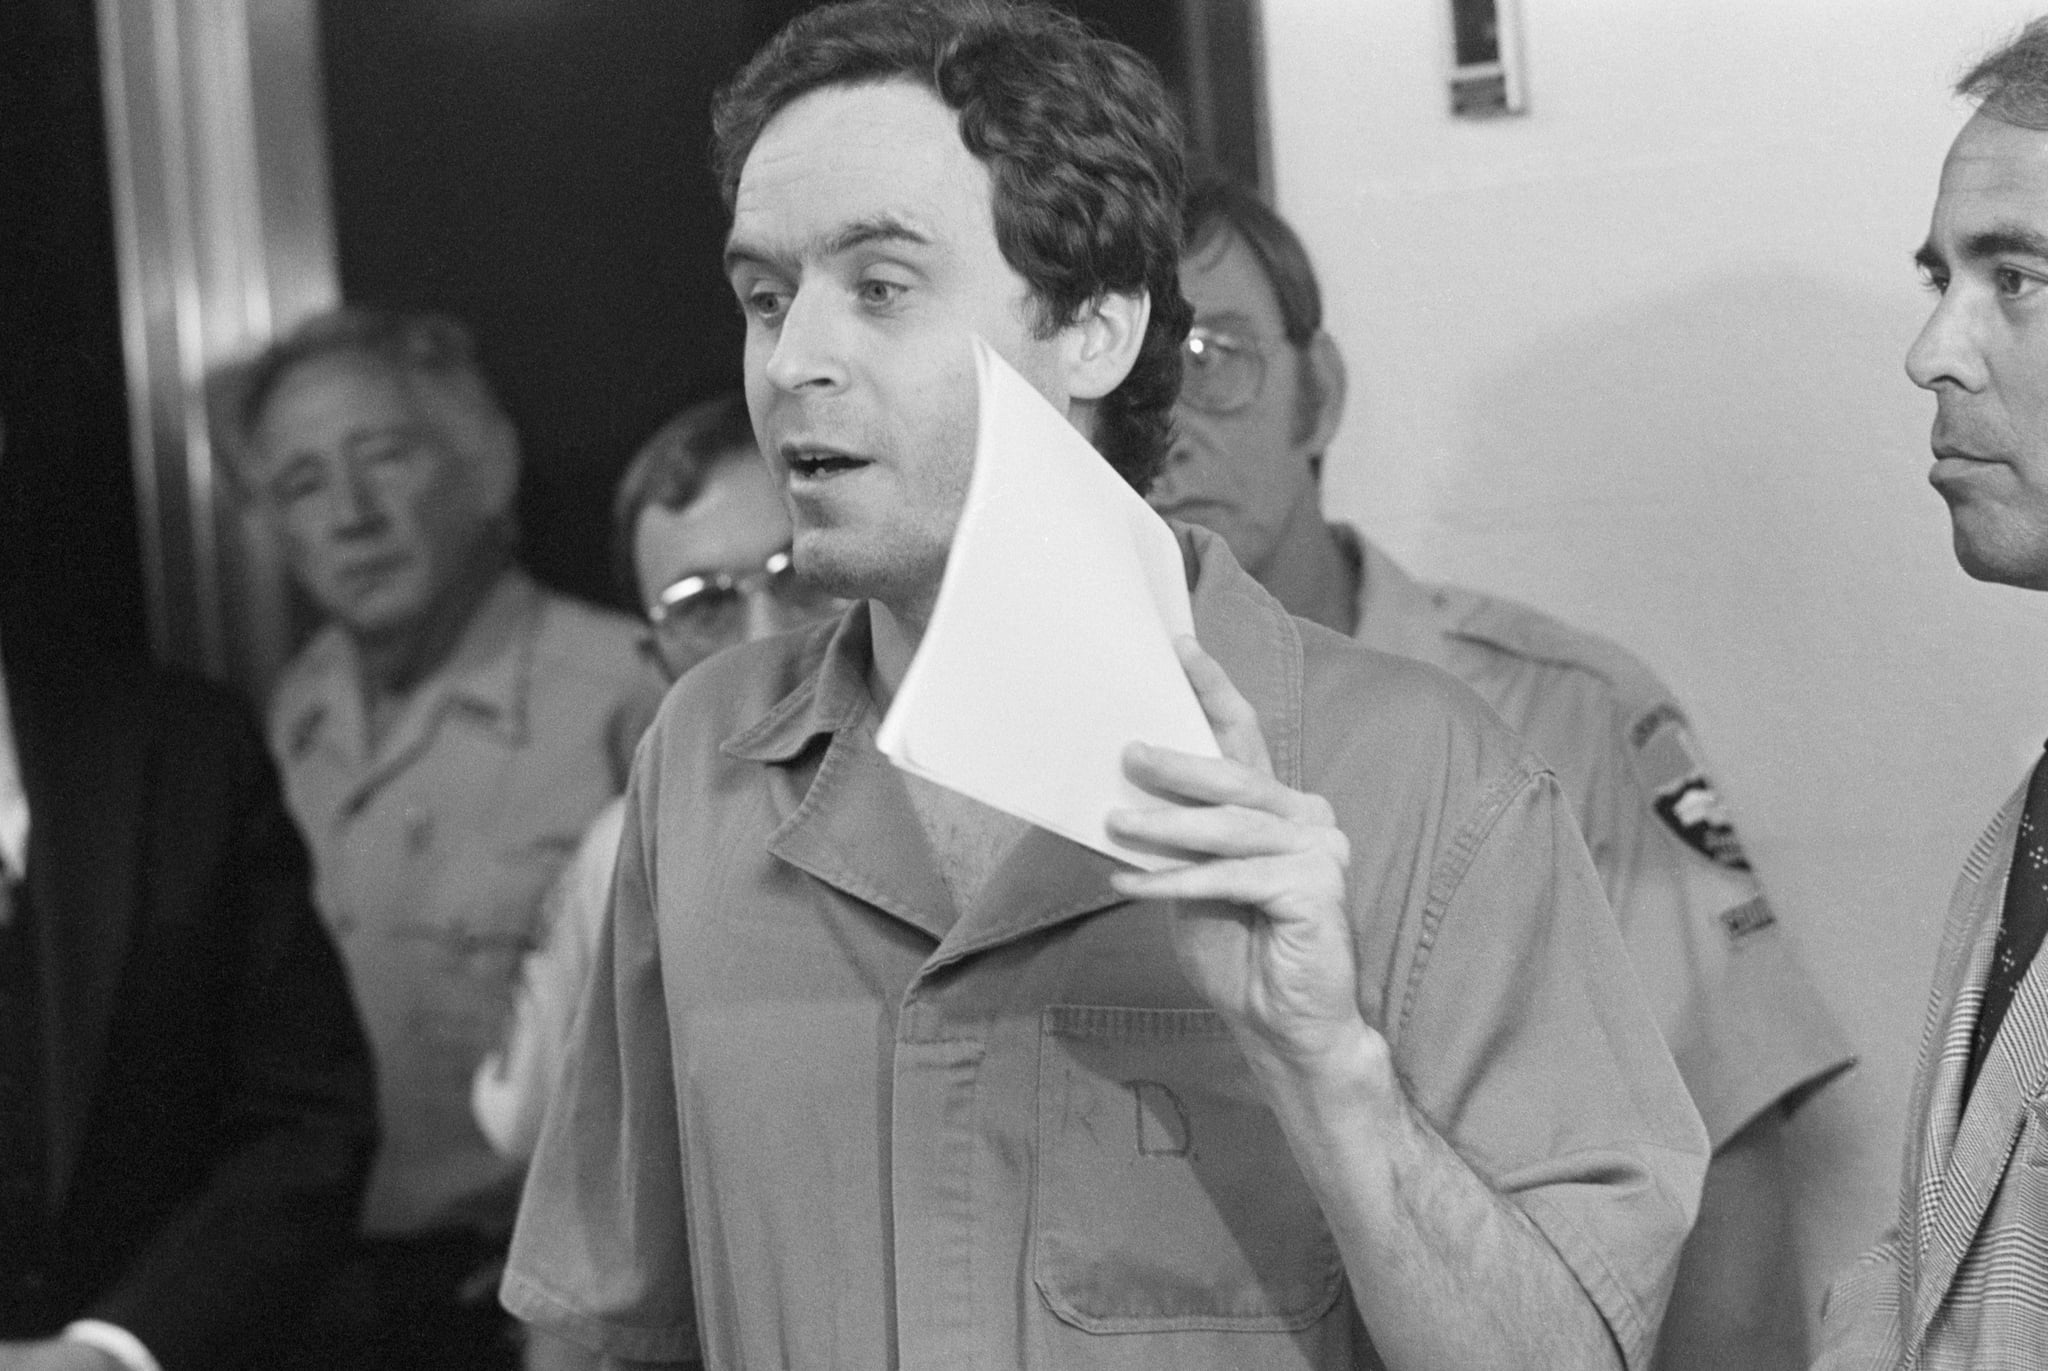 (Original Caption) Tallahassee, FL: Suspected murderer Theodoure Bundy, charged with the killings of FSU coeds Margaret Bowman and Lisa Levy who were beaten and strangled at the Chi Omega house in January. 7/27/1978